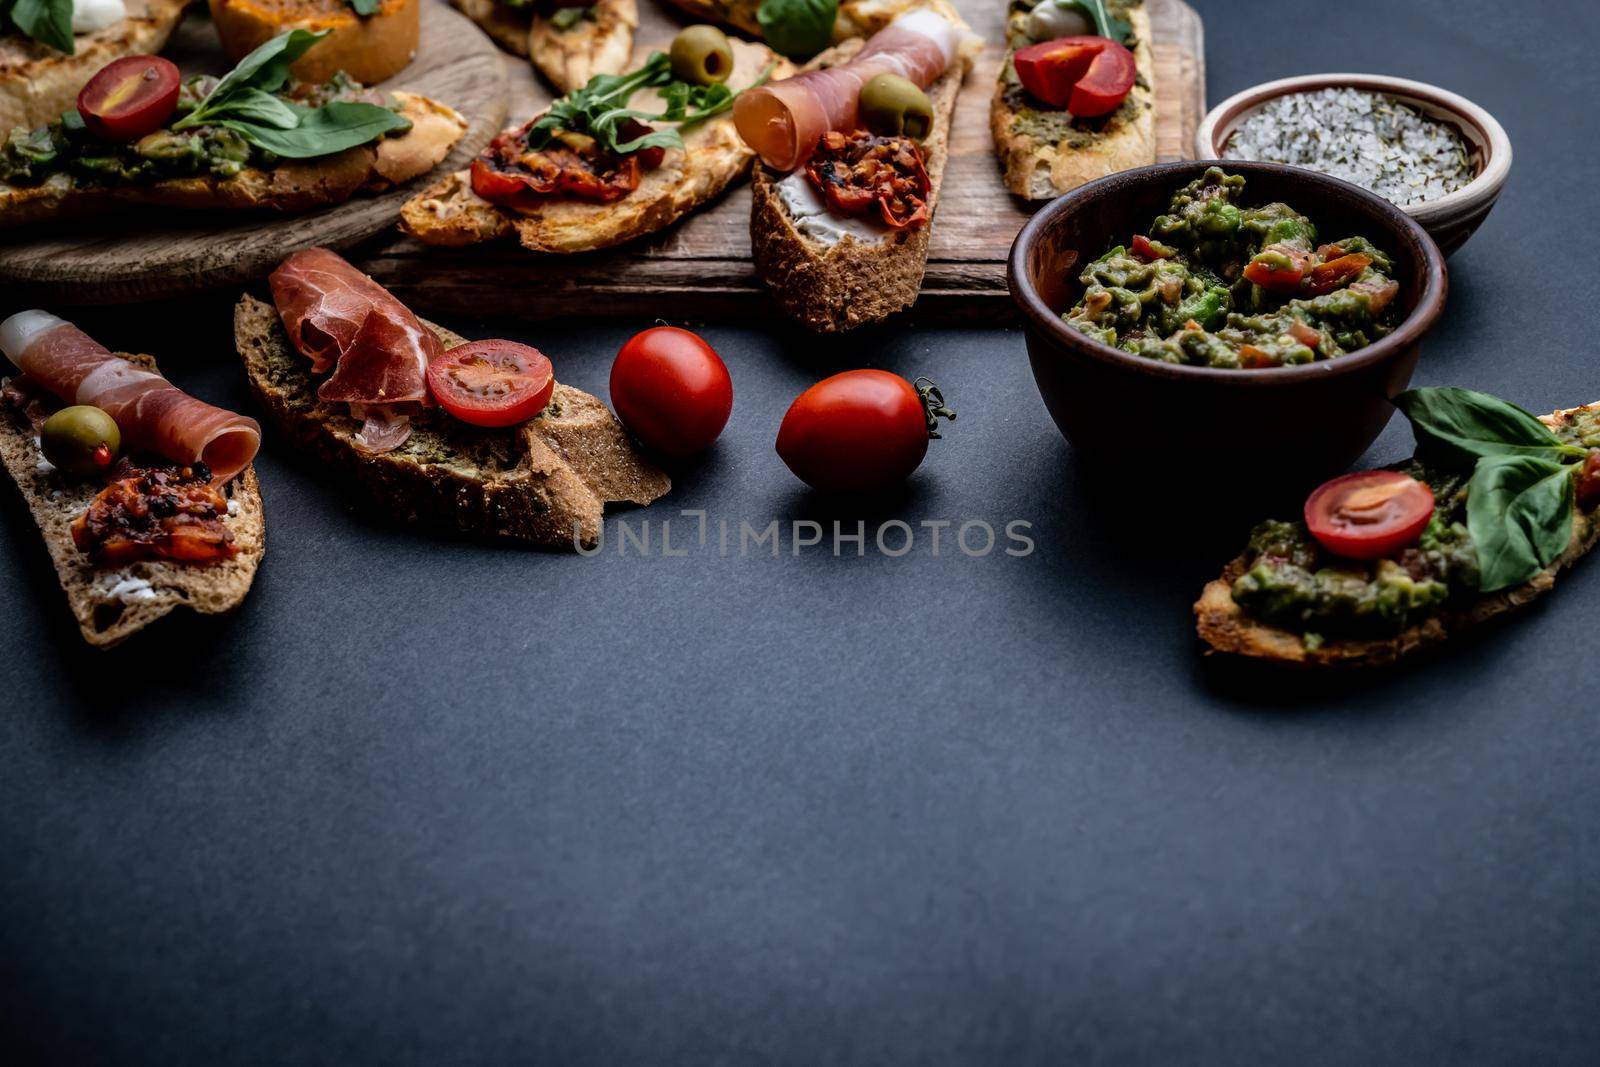 Set of bruschettas with jamon, olives, pesto, tomatoes, basil and mozzarella served on wooden board with guacamole and cherries. Traditional mediterranean antipasti food composition with copy space